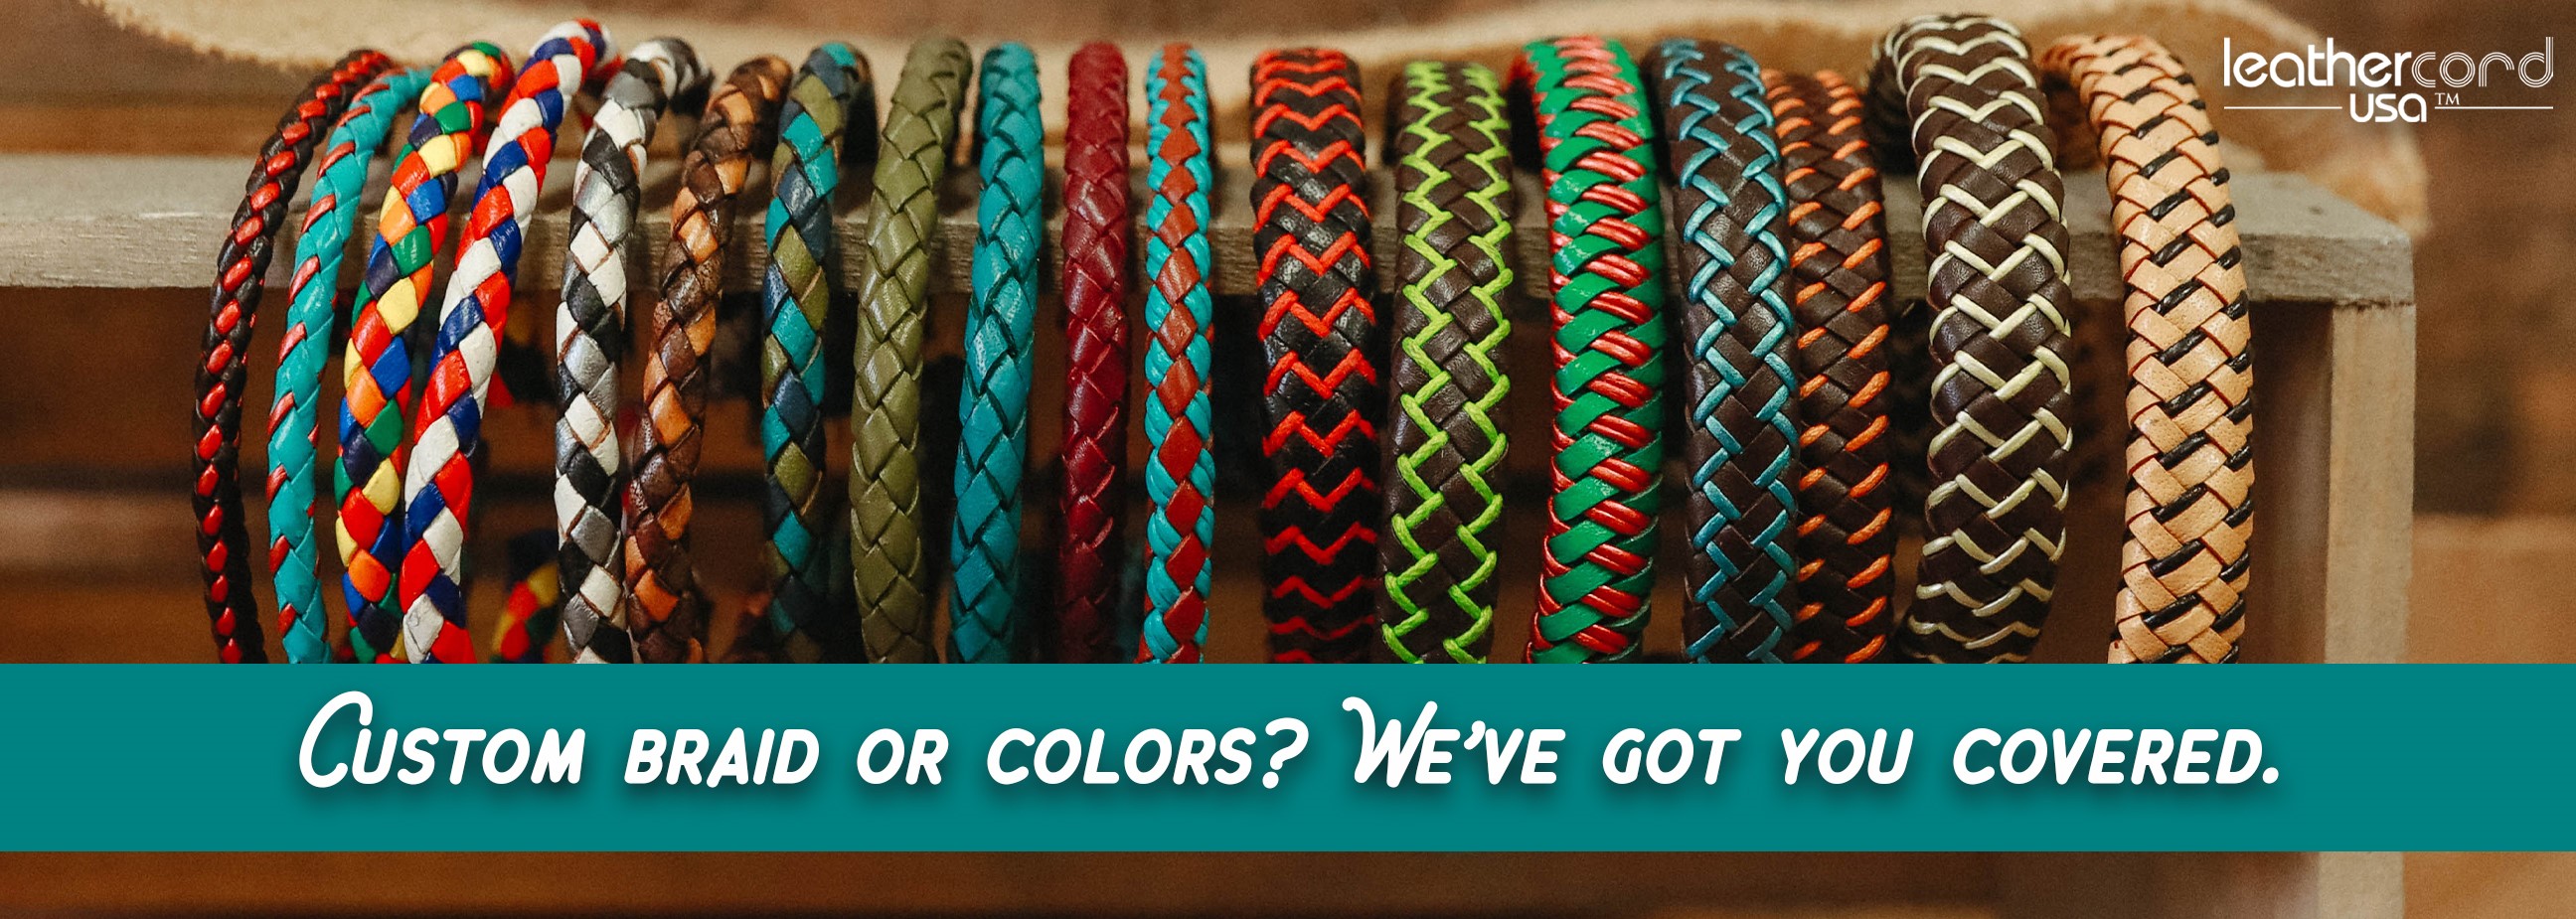 Leather Cord Manufacturer